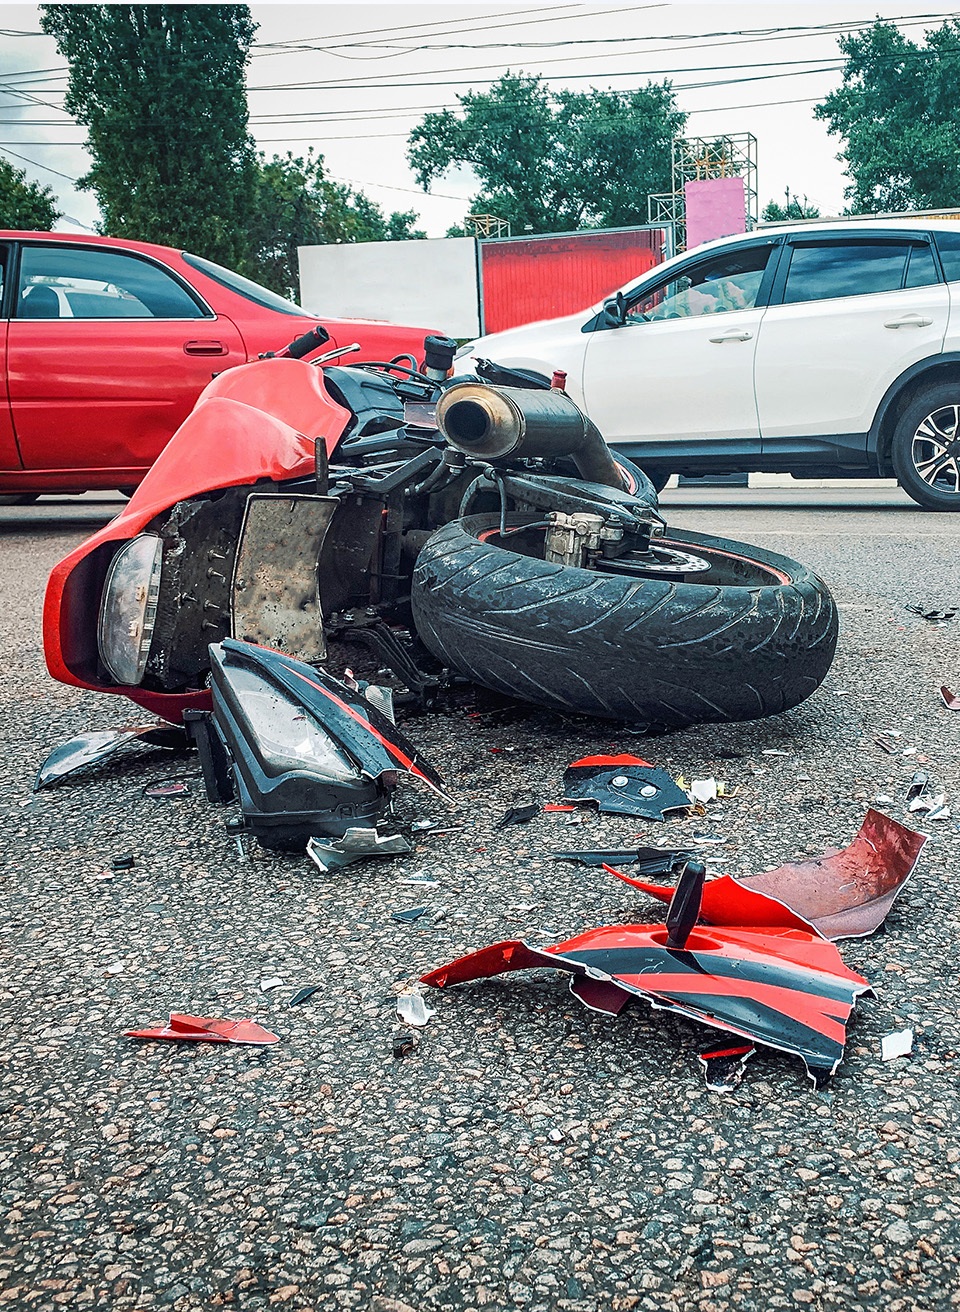 A crashed motorcycle laying on the ground.